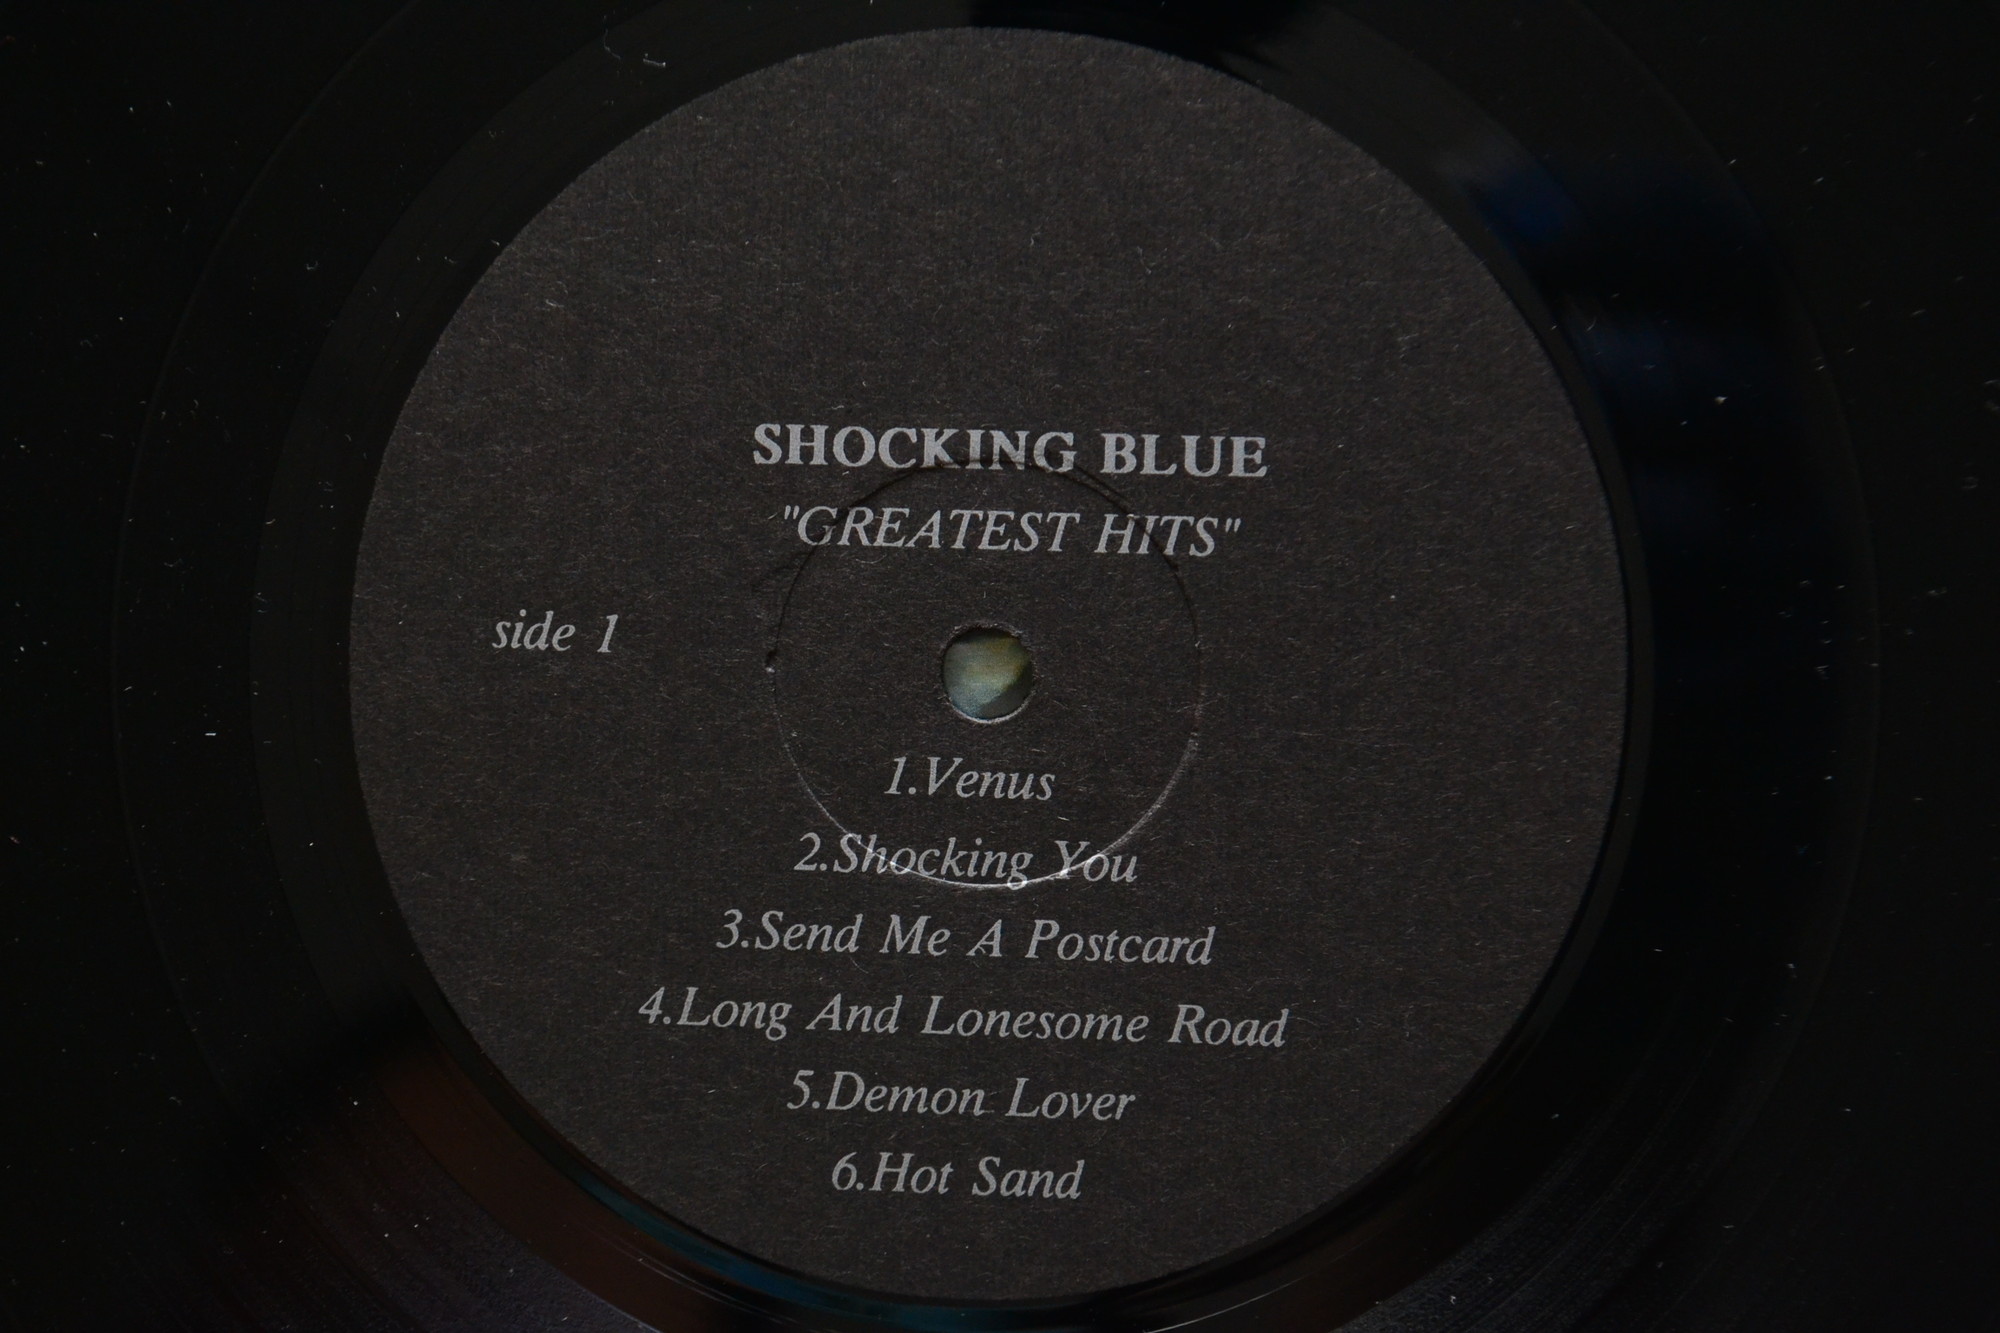 The Shocking Blue. Golden Hits